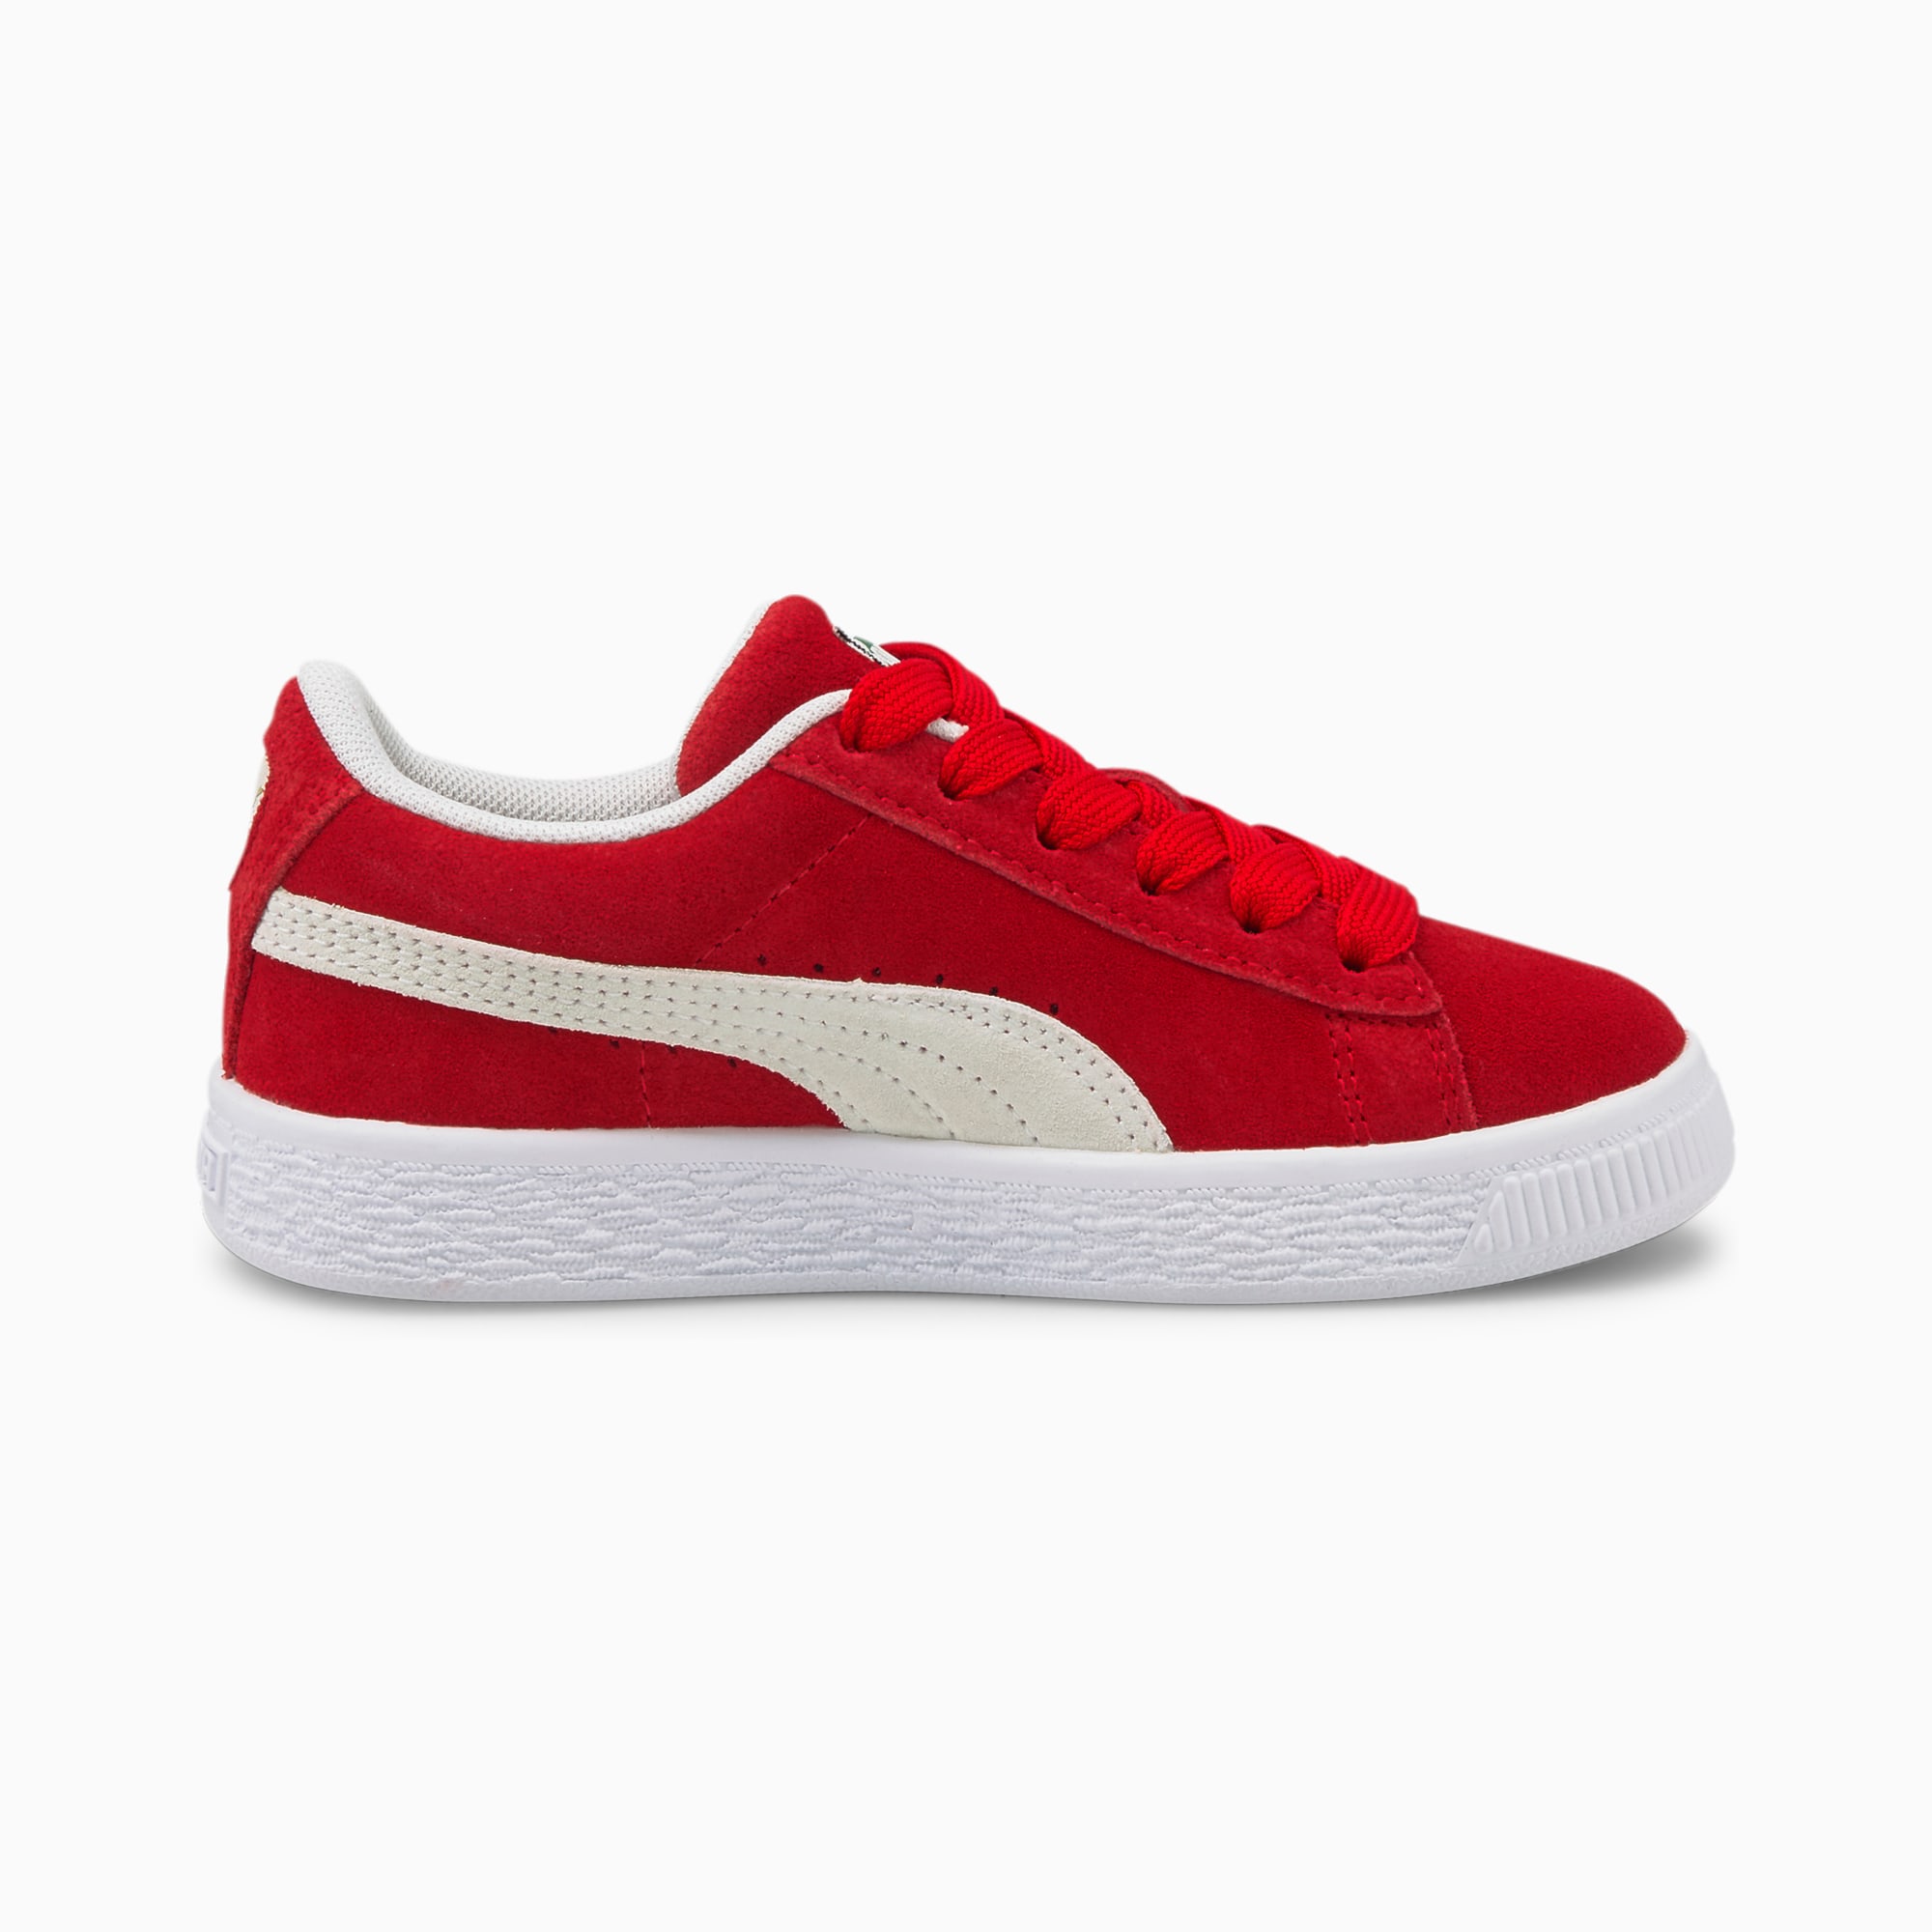 PUMA Suede Classic Xxi Kids' Trainers, High Risk Red/White, Size 27,5, Shoes